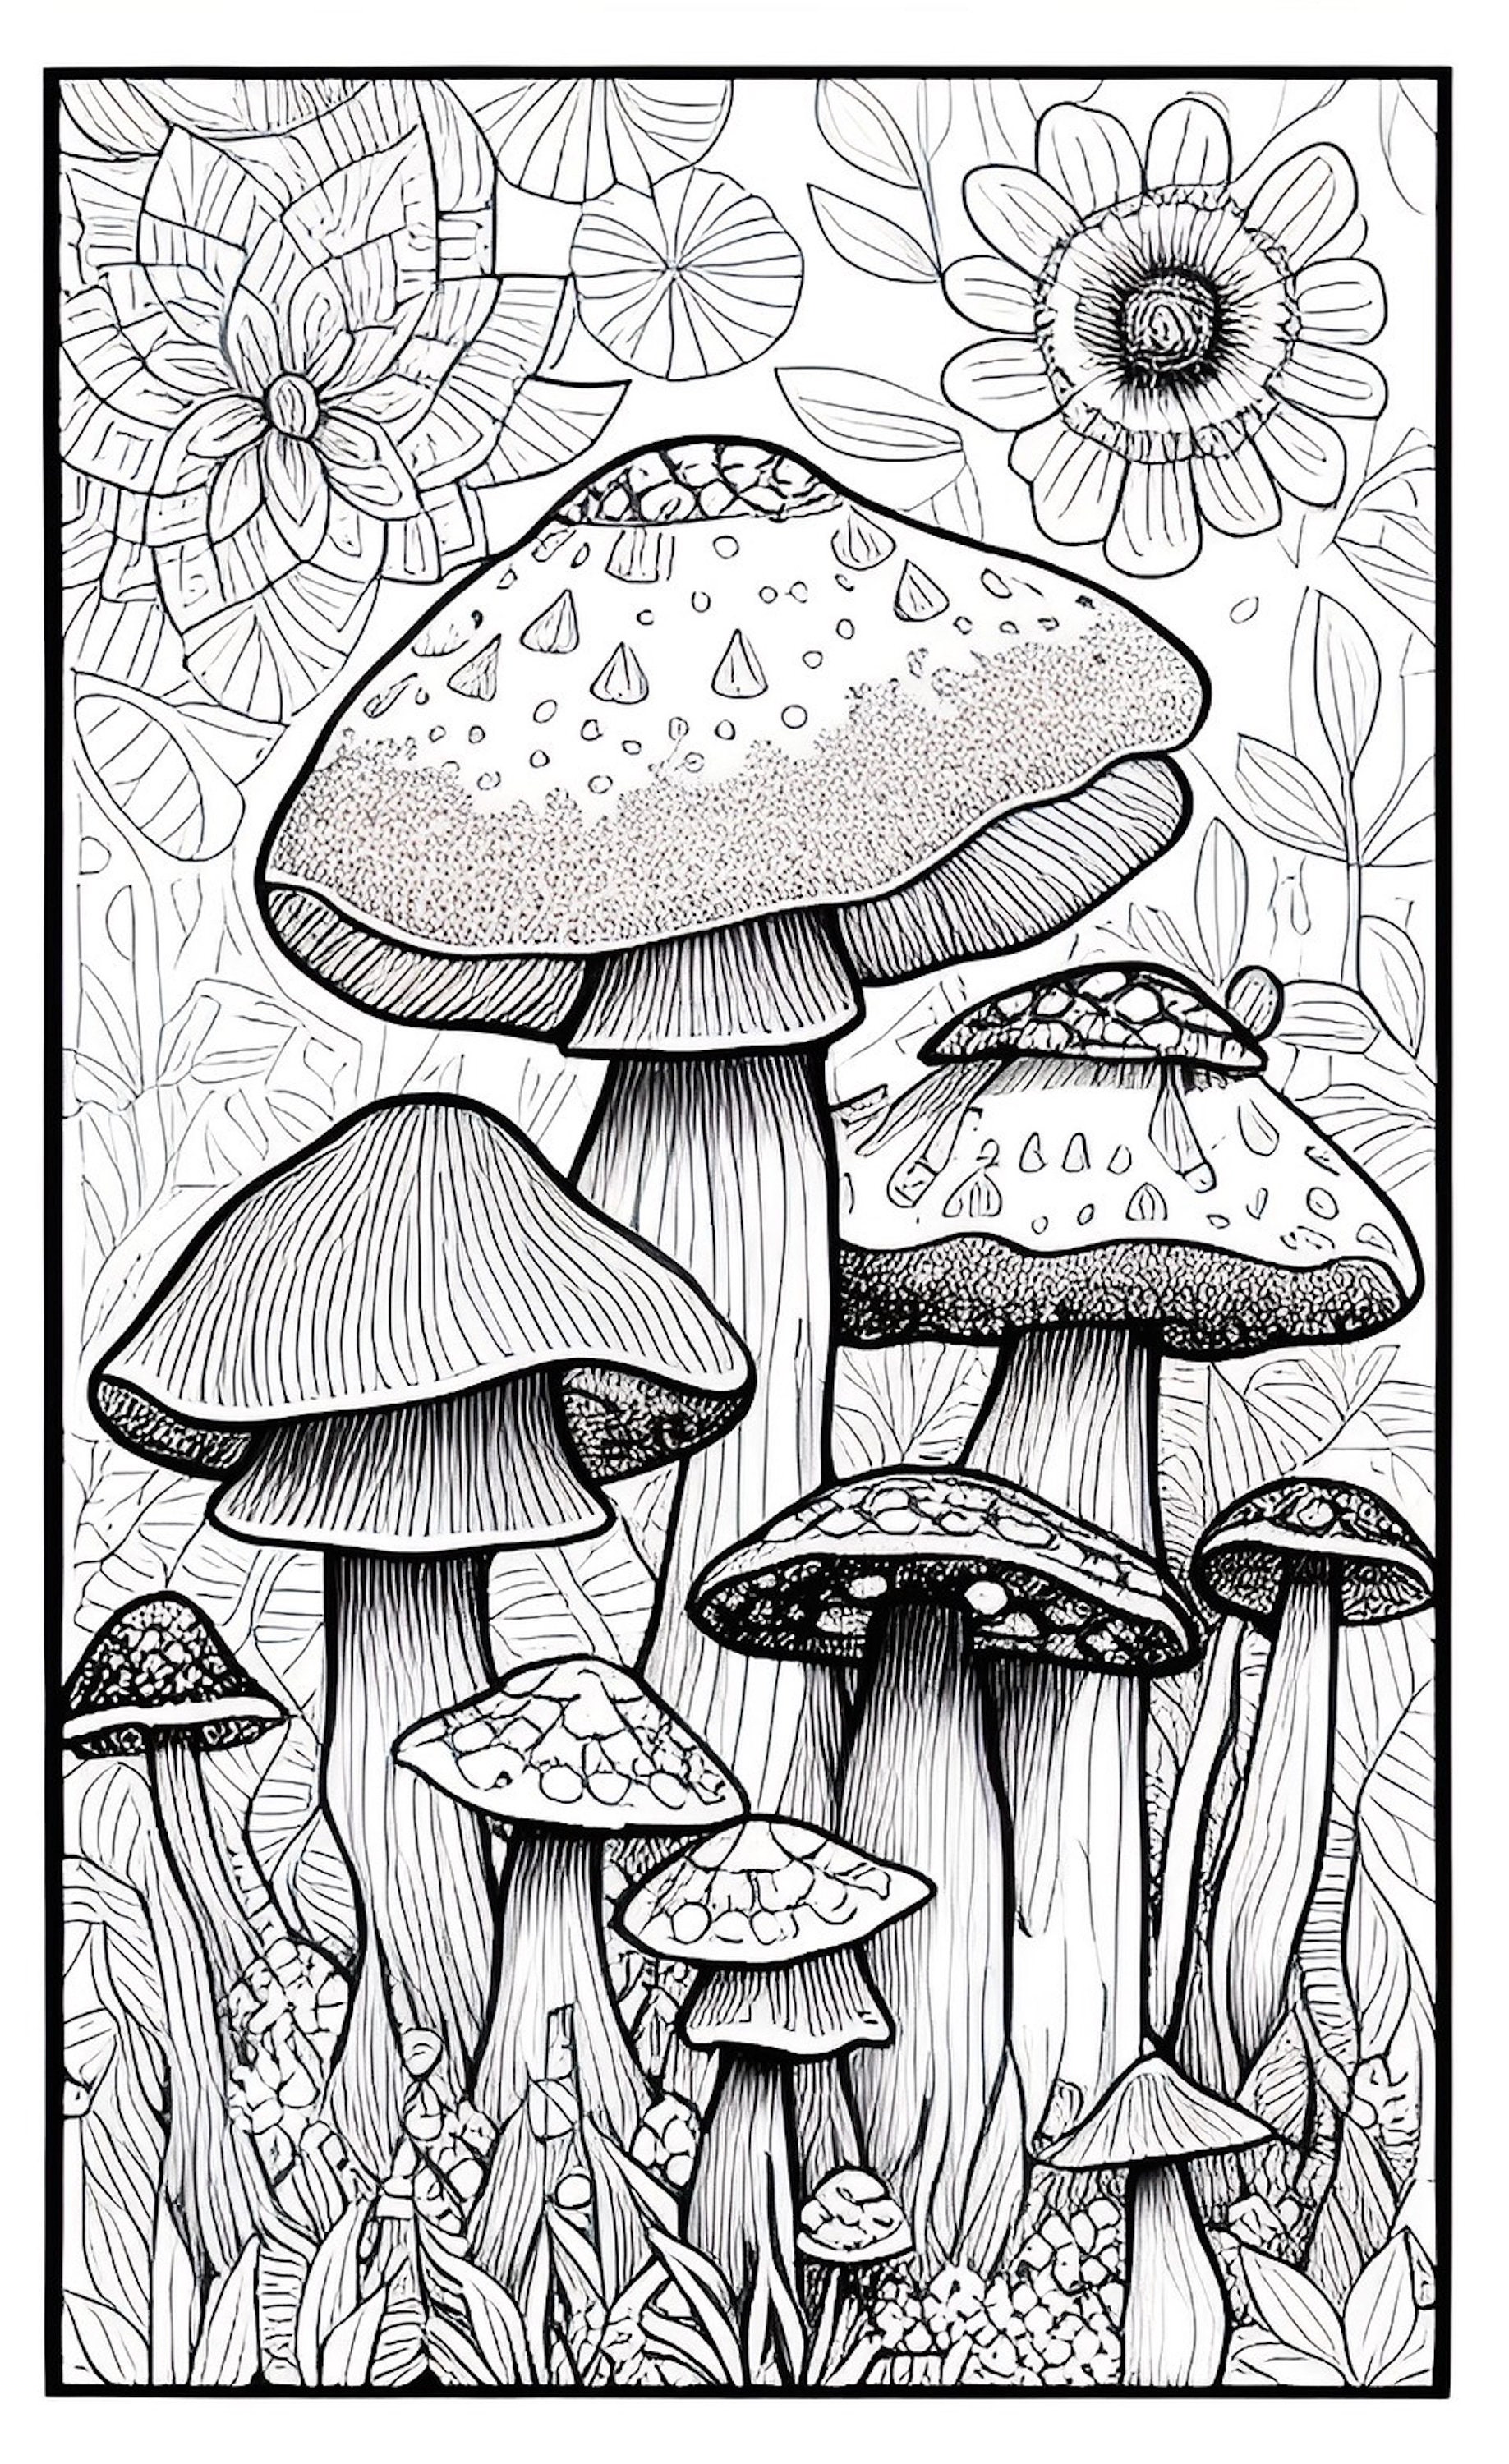 Mushroom Coloring Book for Adults Relaxation: Cool Coloring Books for  Adults, Shop Today. Get it Tomorrow!